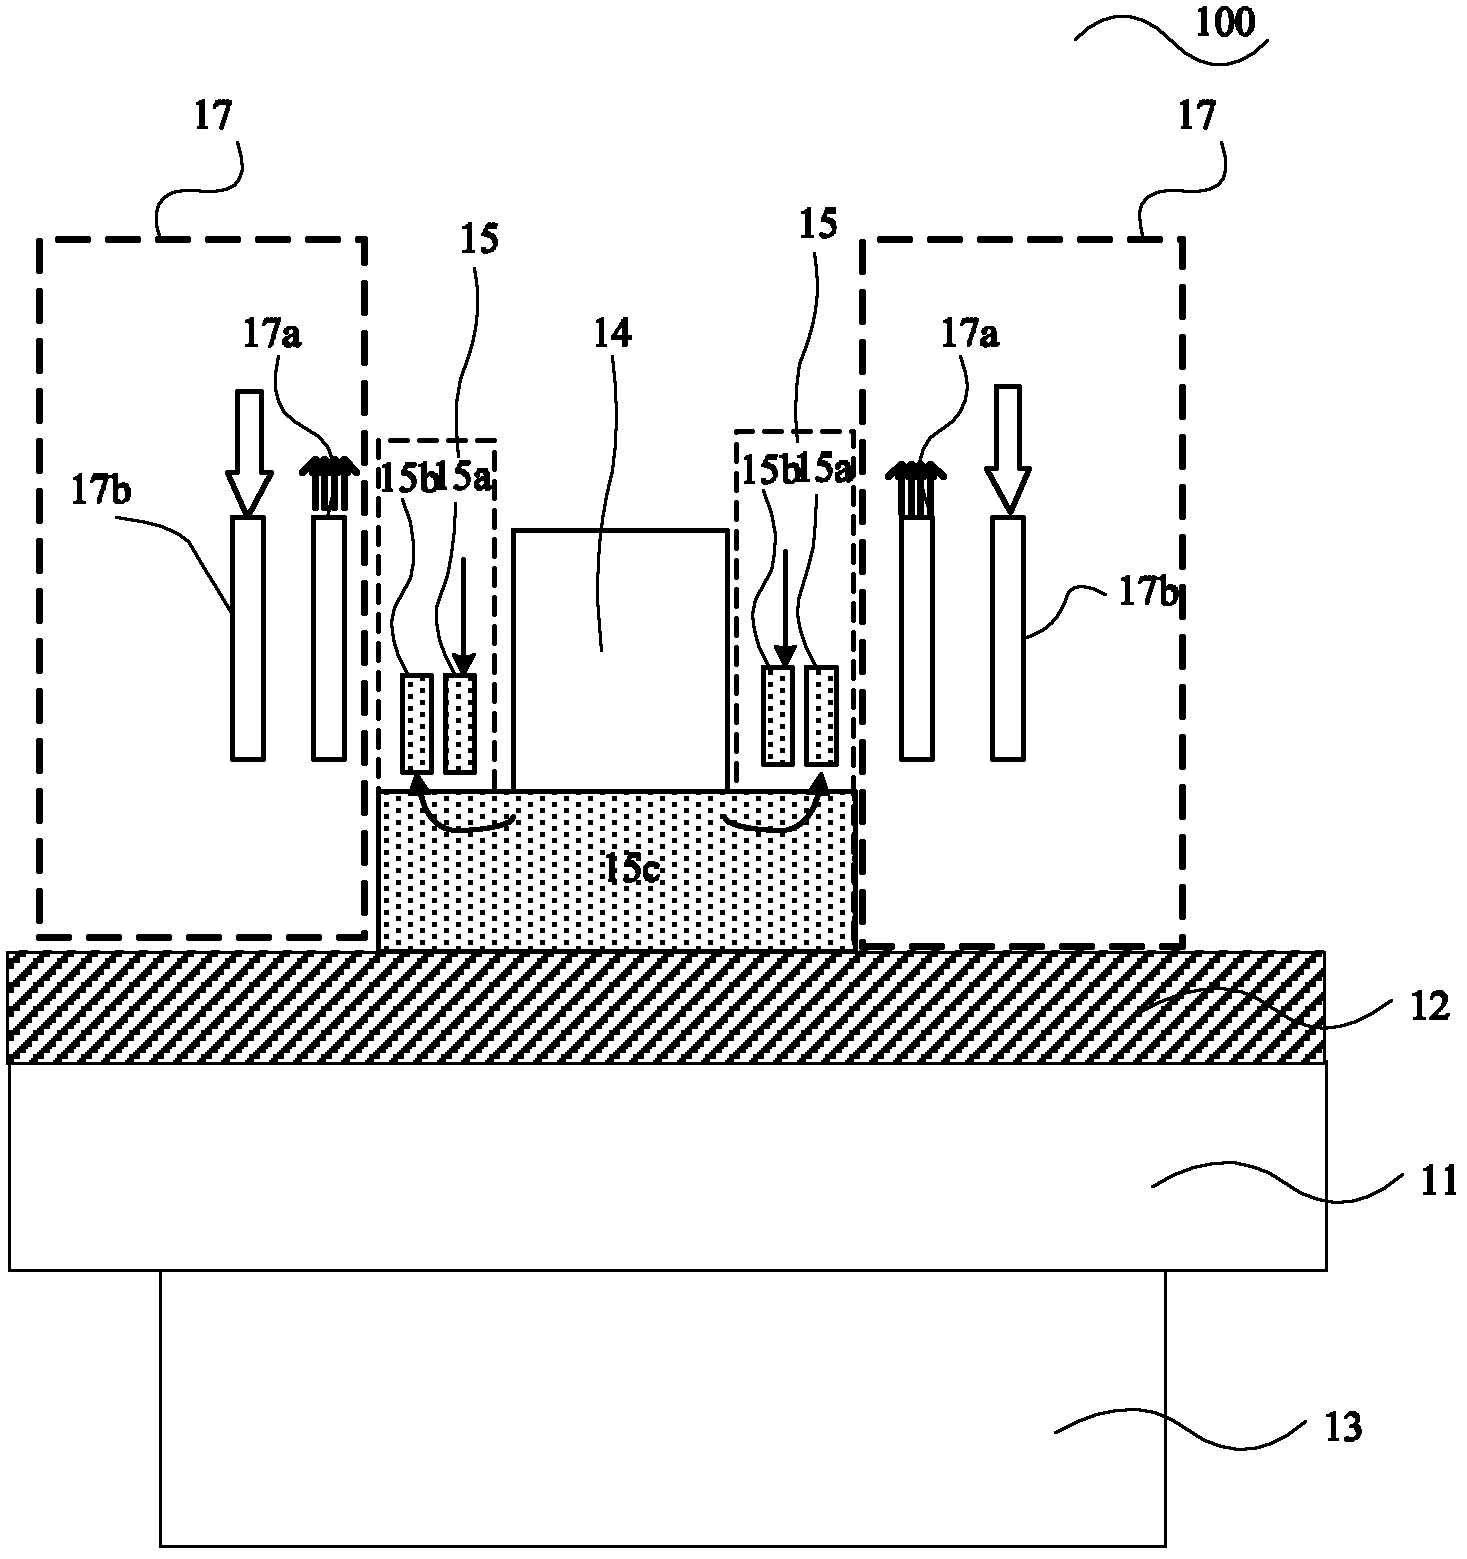 Projection system of immersed photolithography system